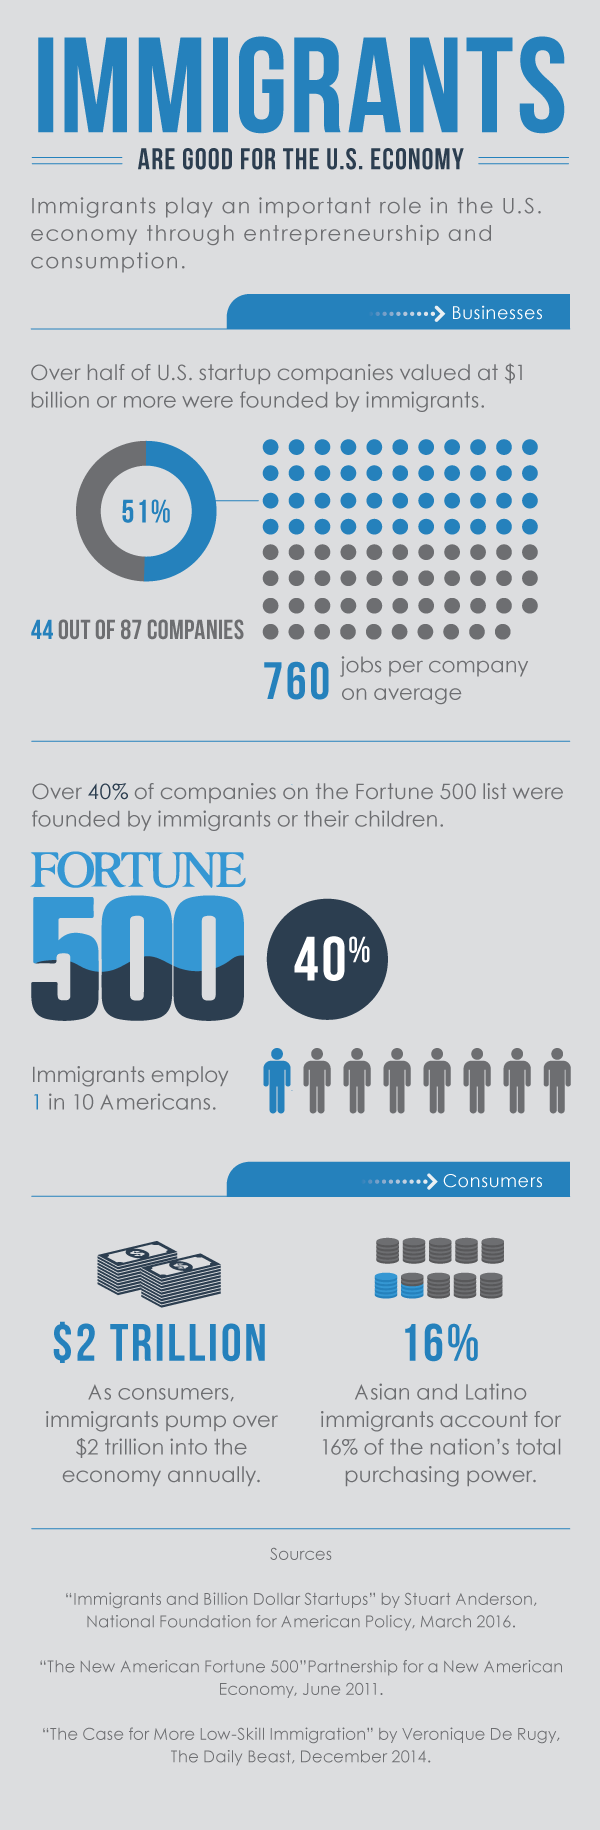 Immigration infographic